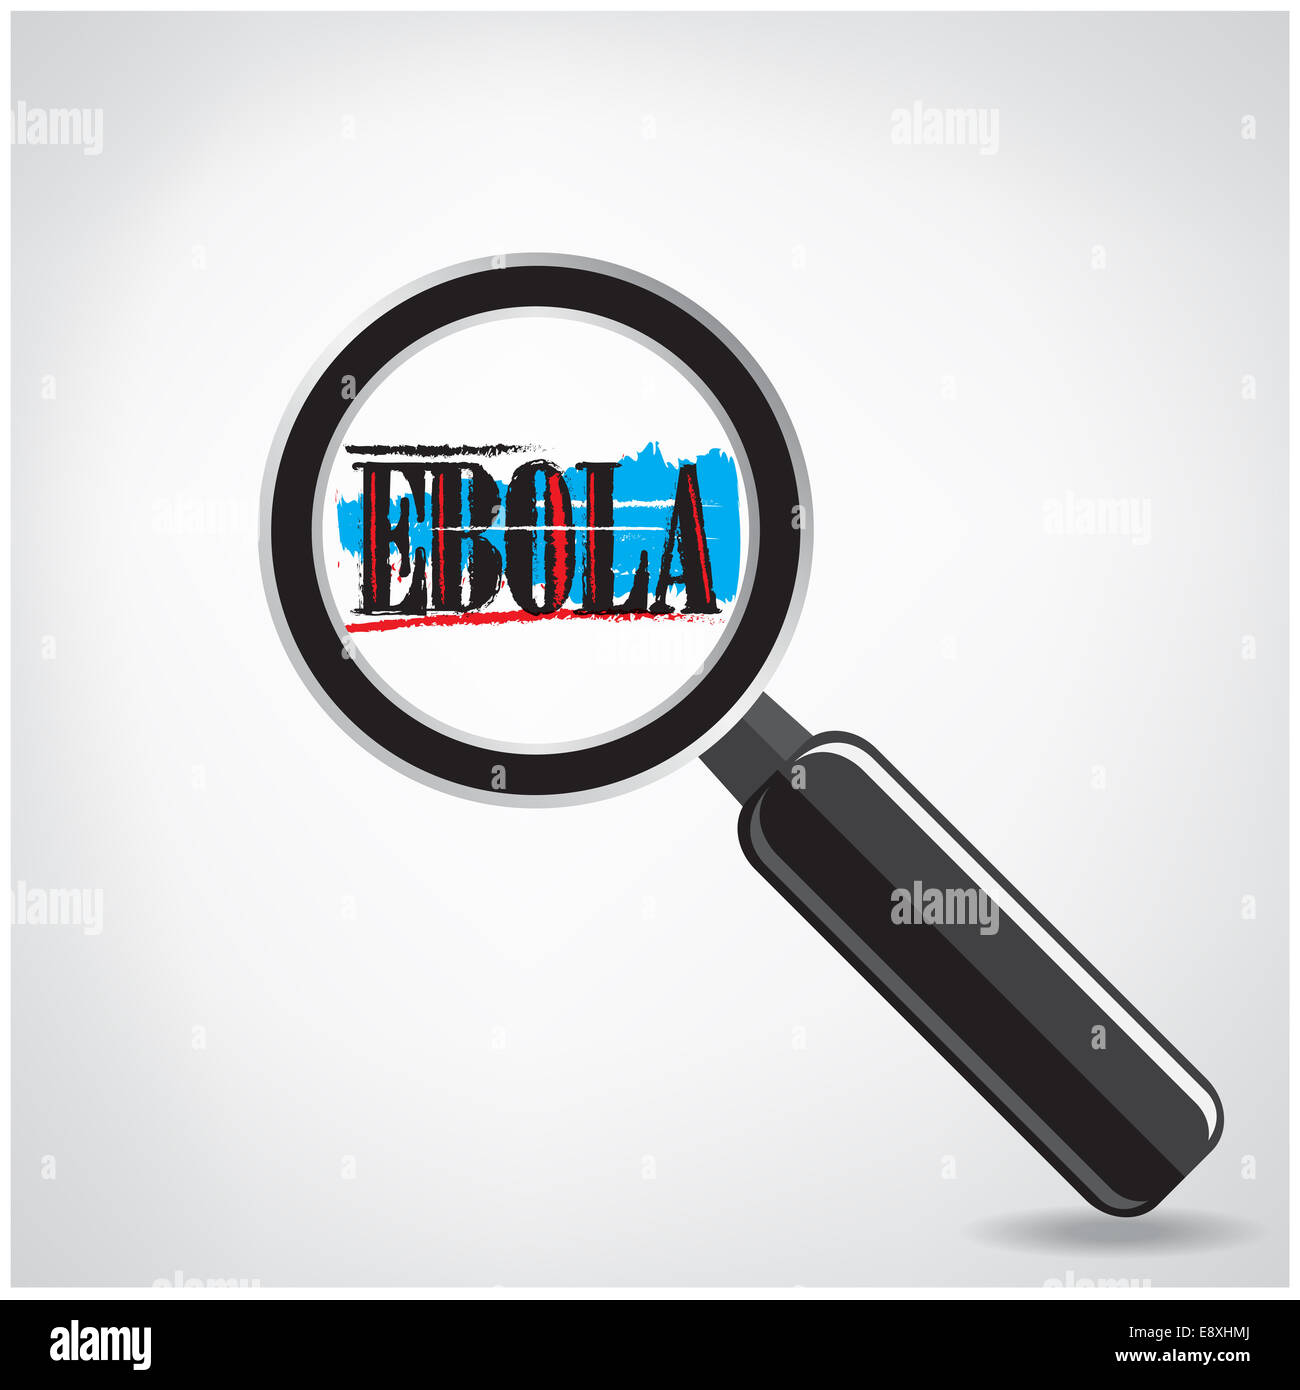 Ebola searching sign or magnifying glass symbol on background. Stock Photo